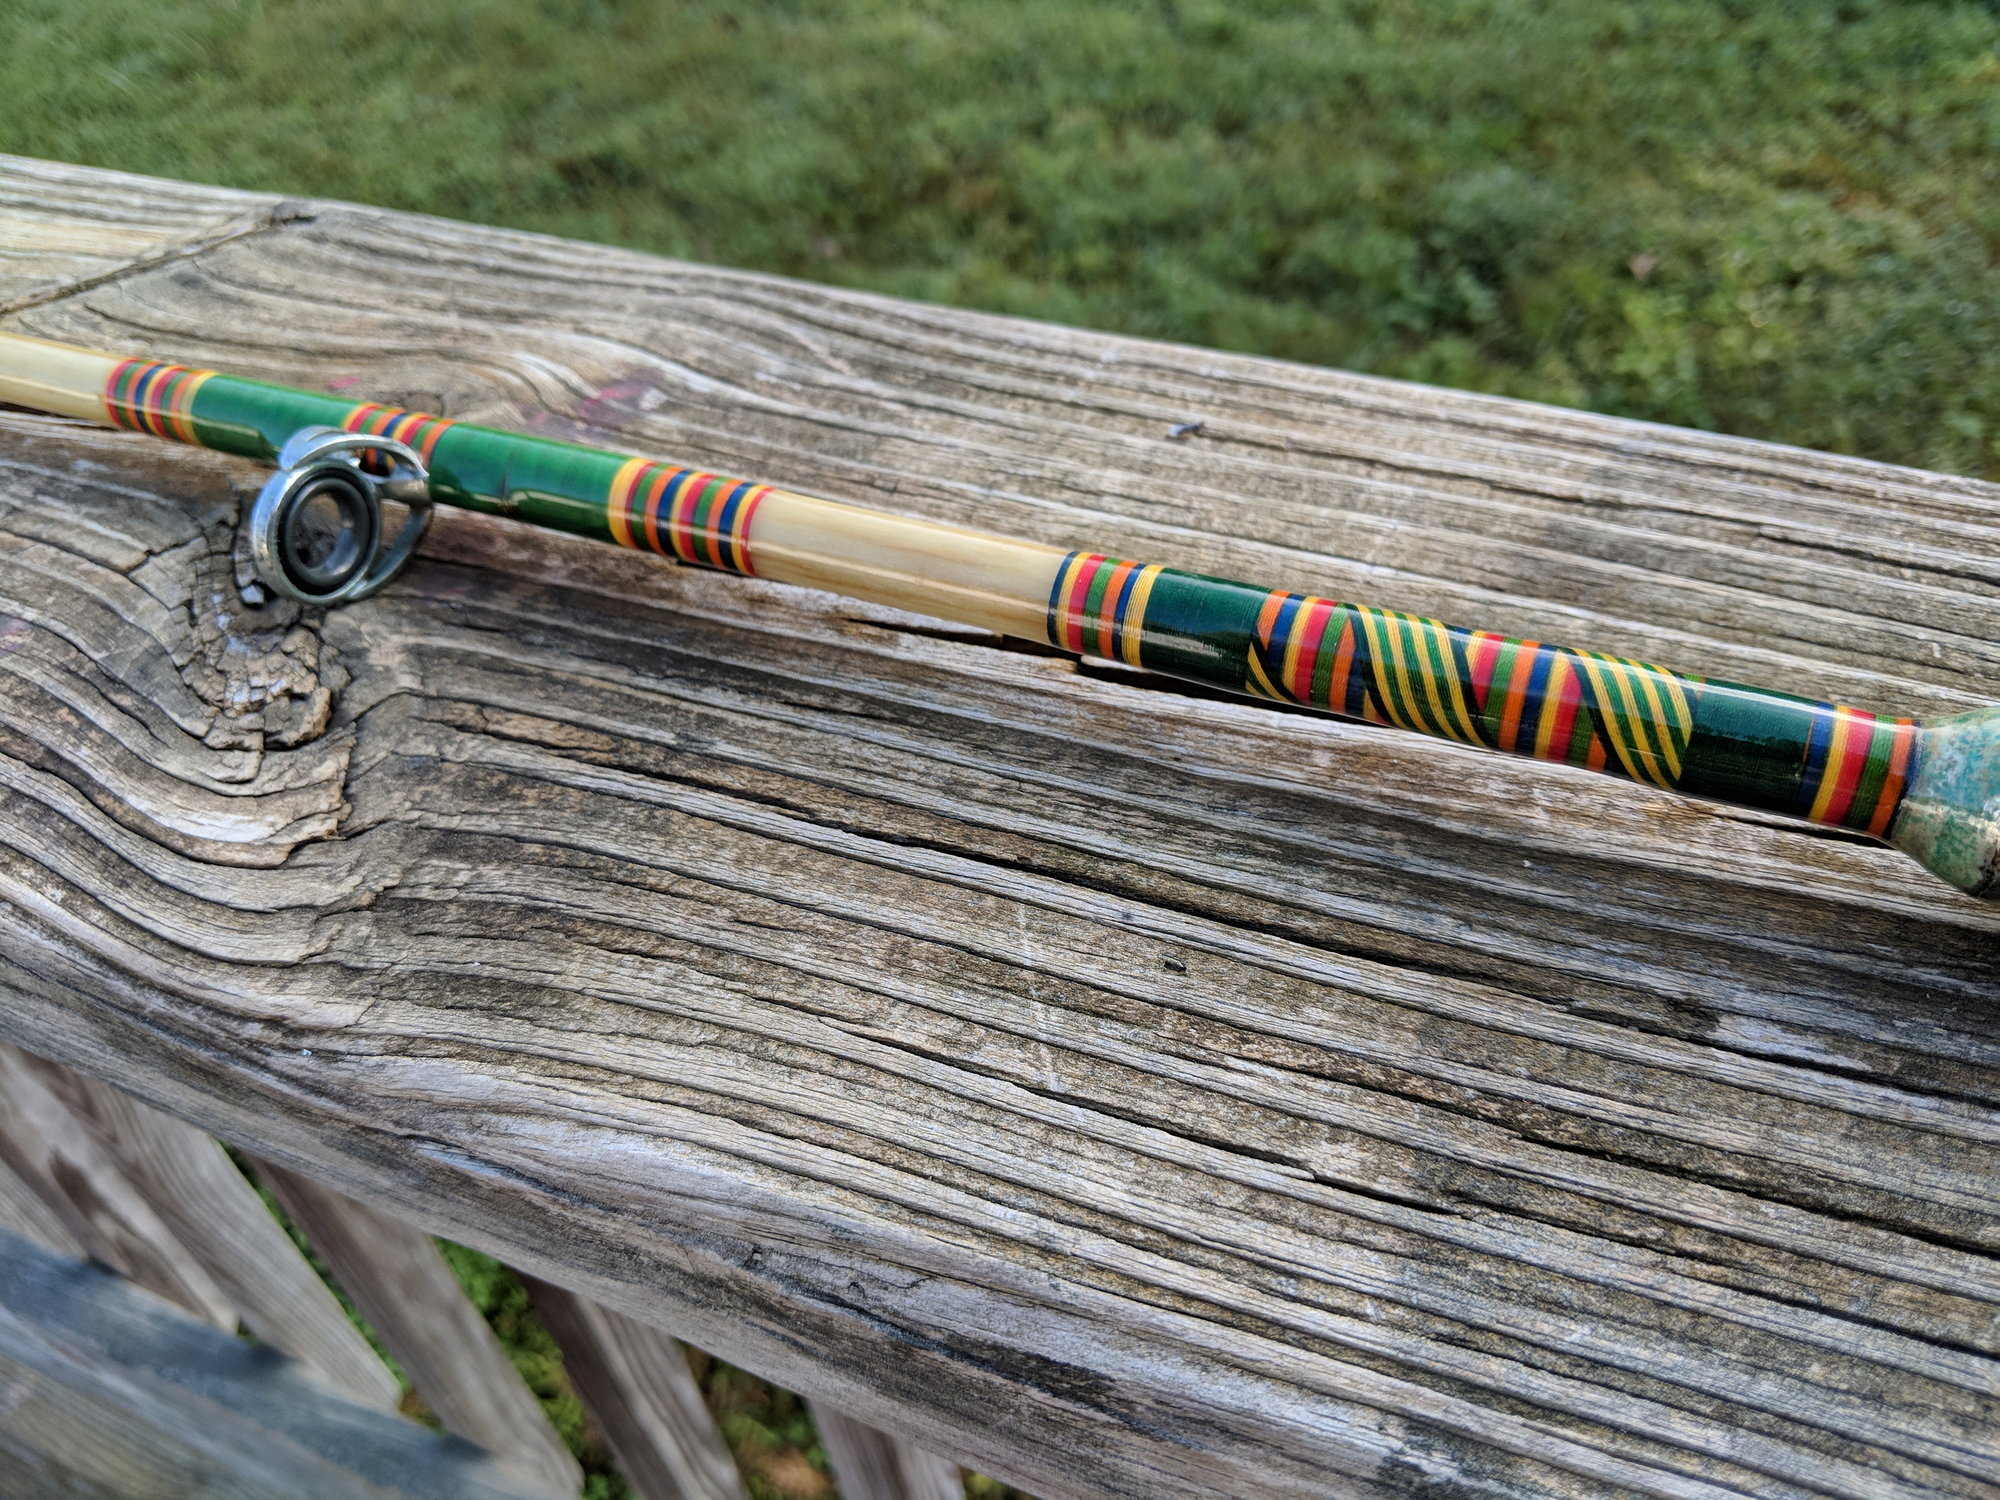 Help identify vintage fishing rod - The Hull Truth - Boating and Fishing  Forum